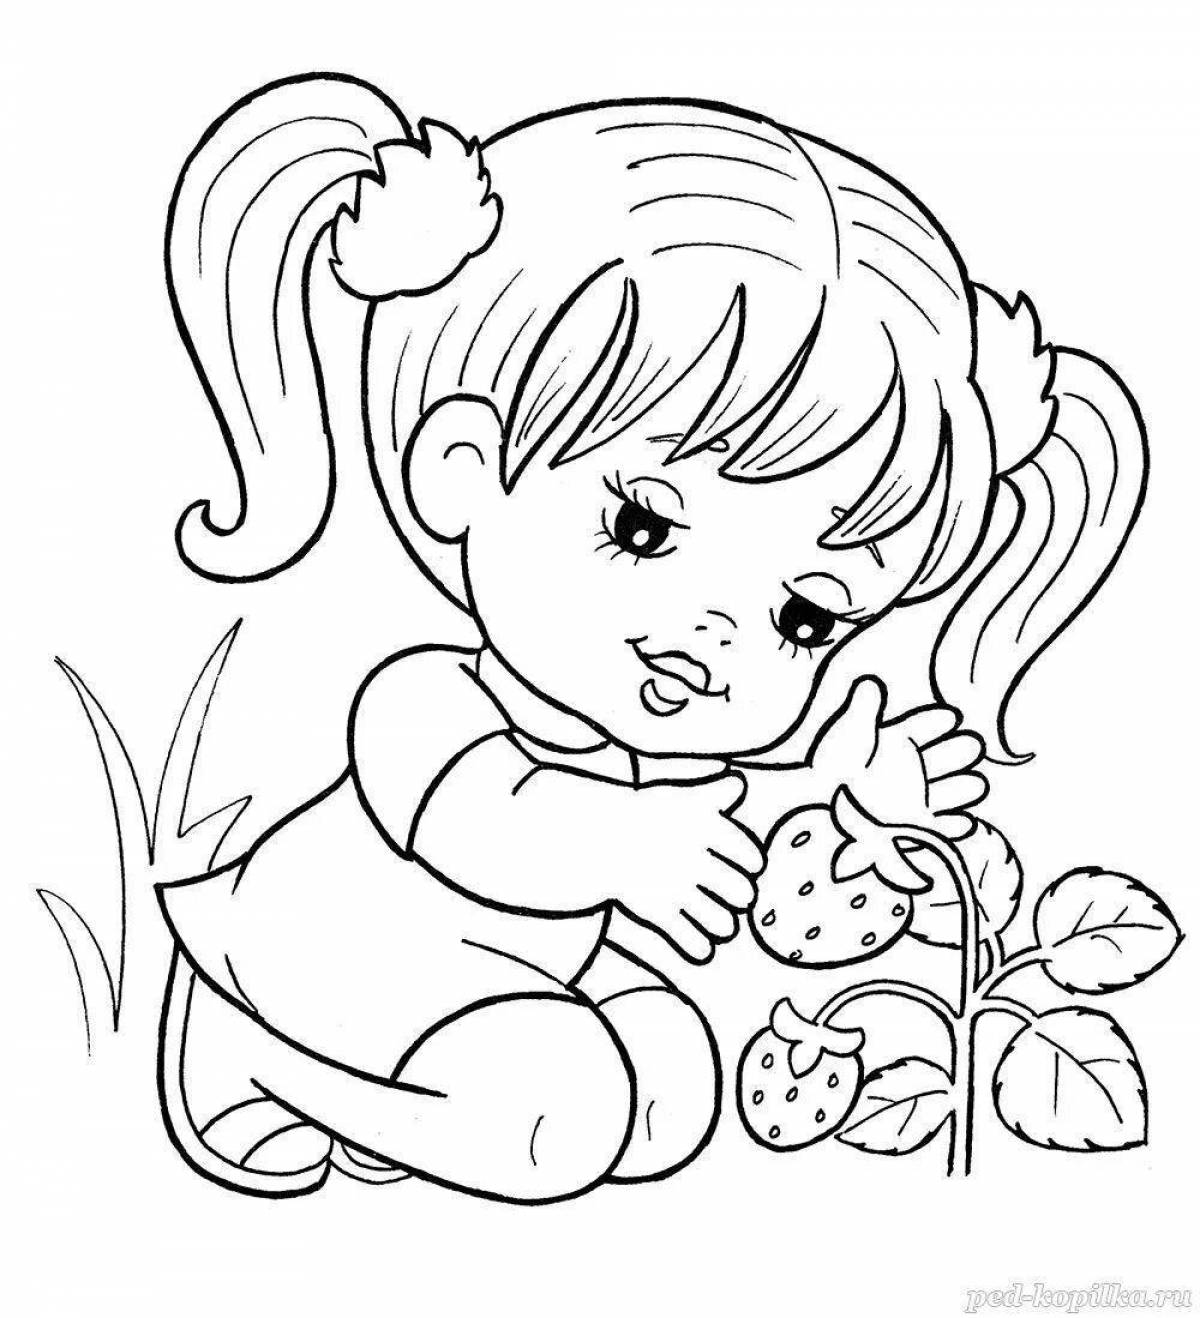 Playful coloring for girls 5-6 years old